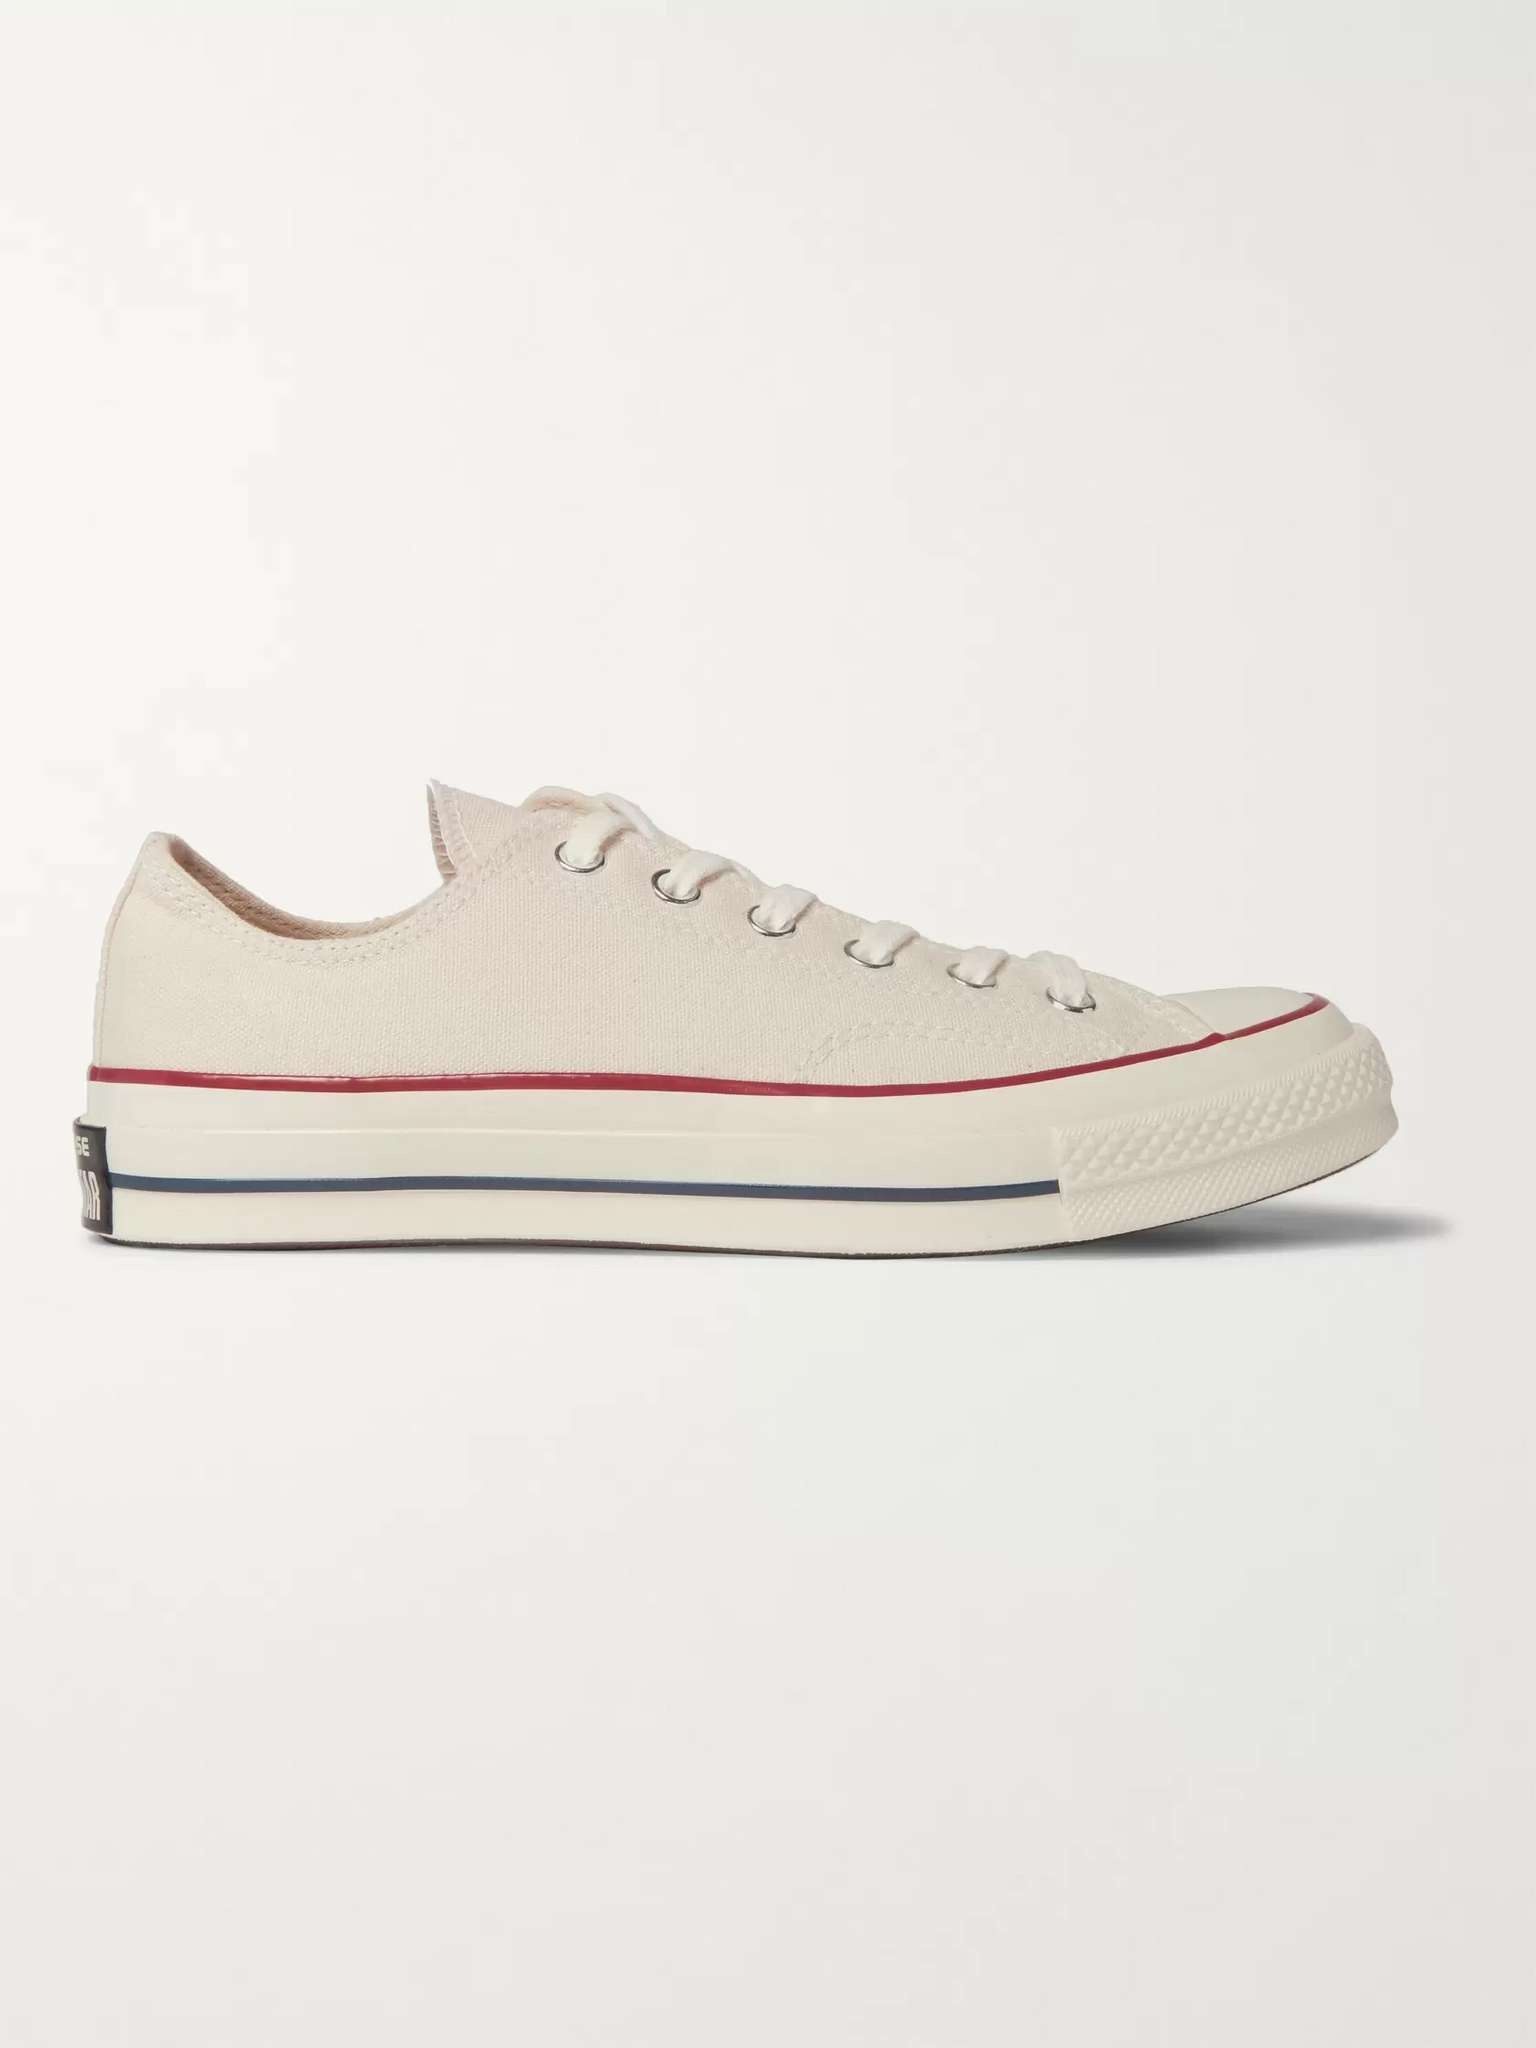 1970s Chuck Taylor All Star Canvas Sneakers - 1